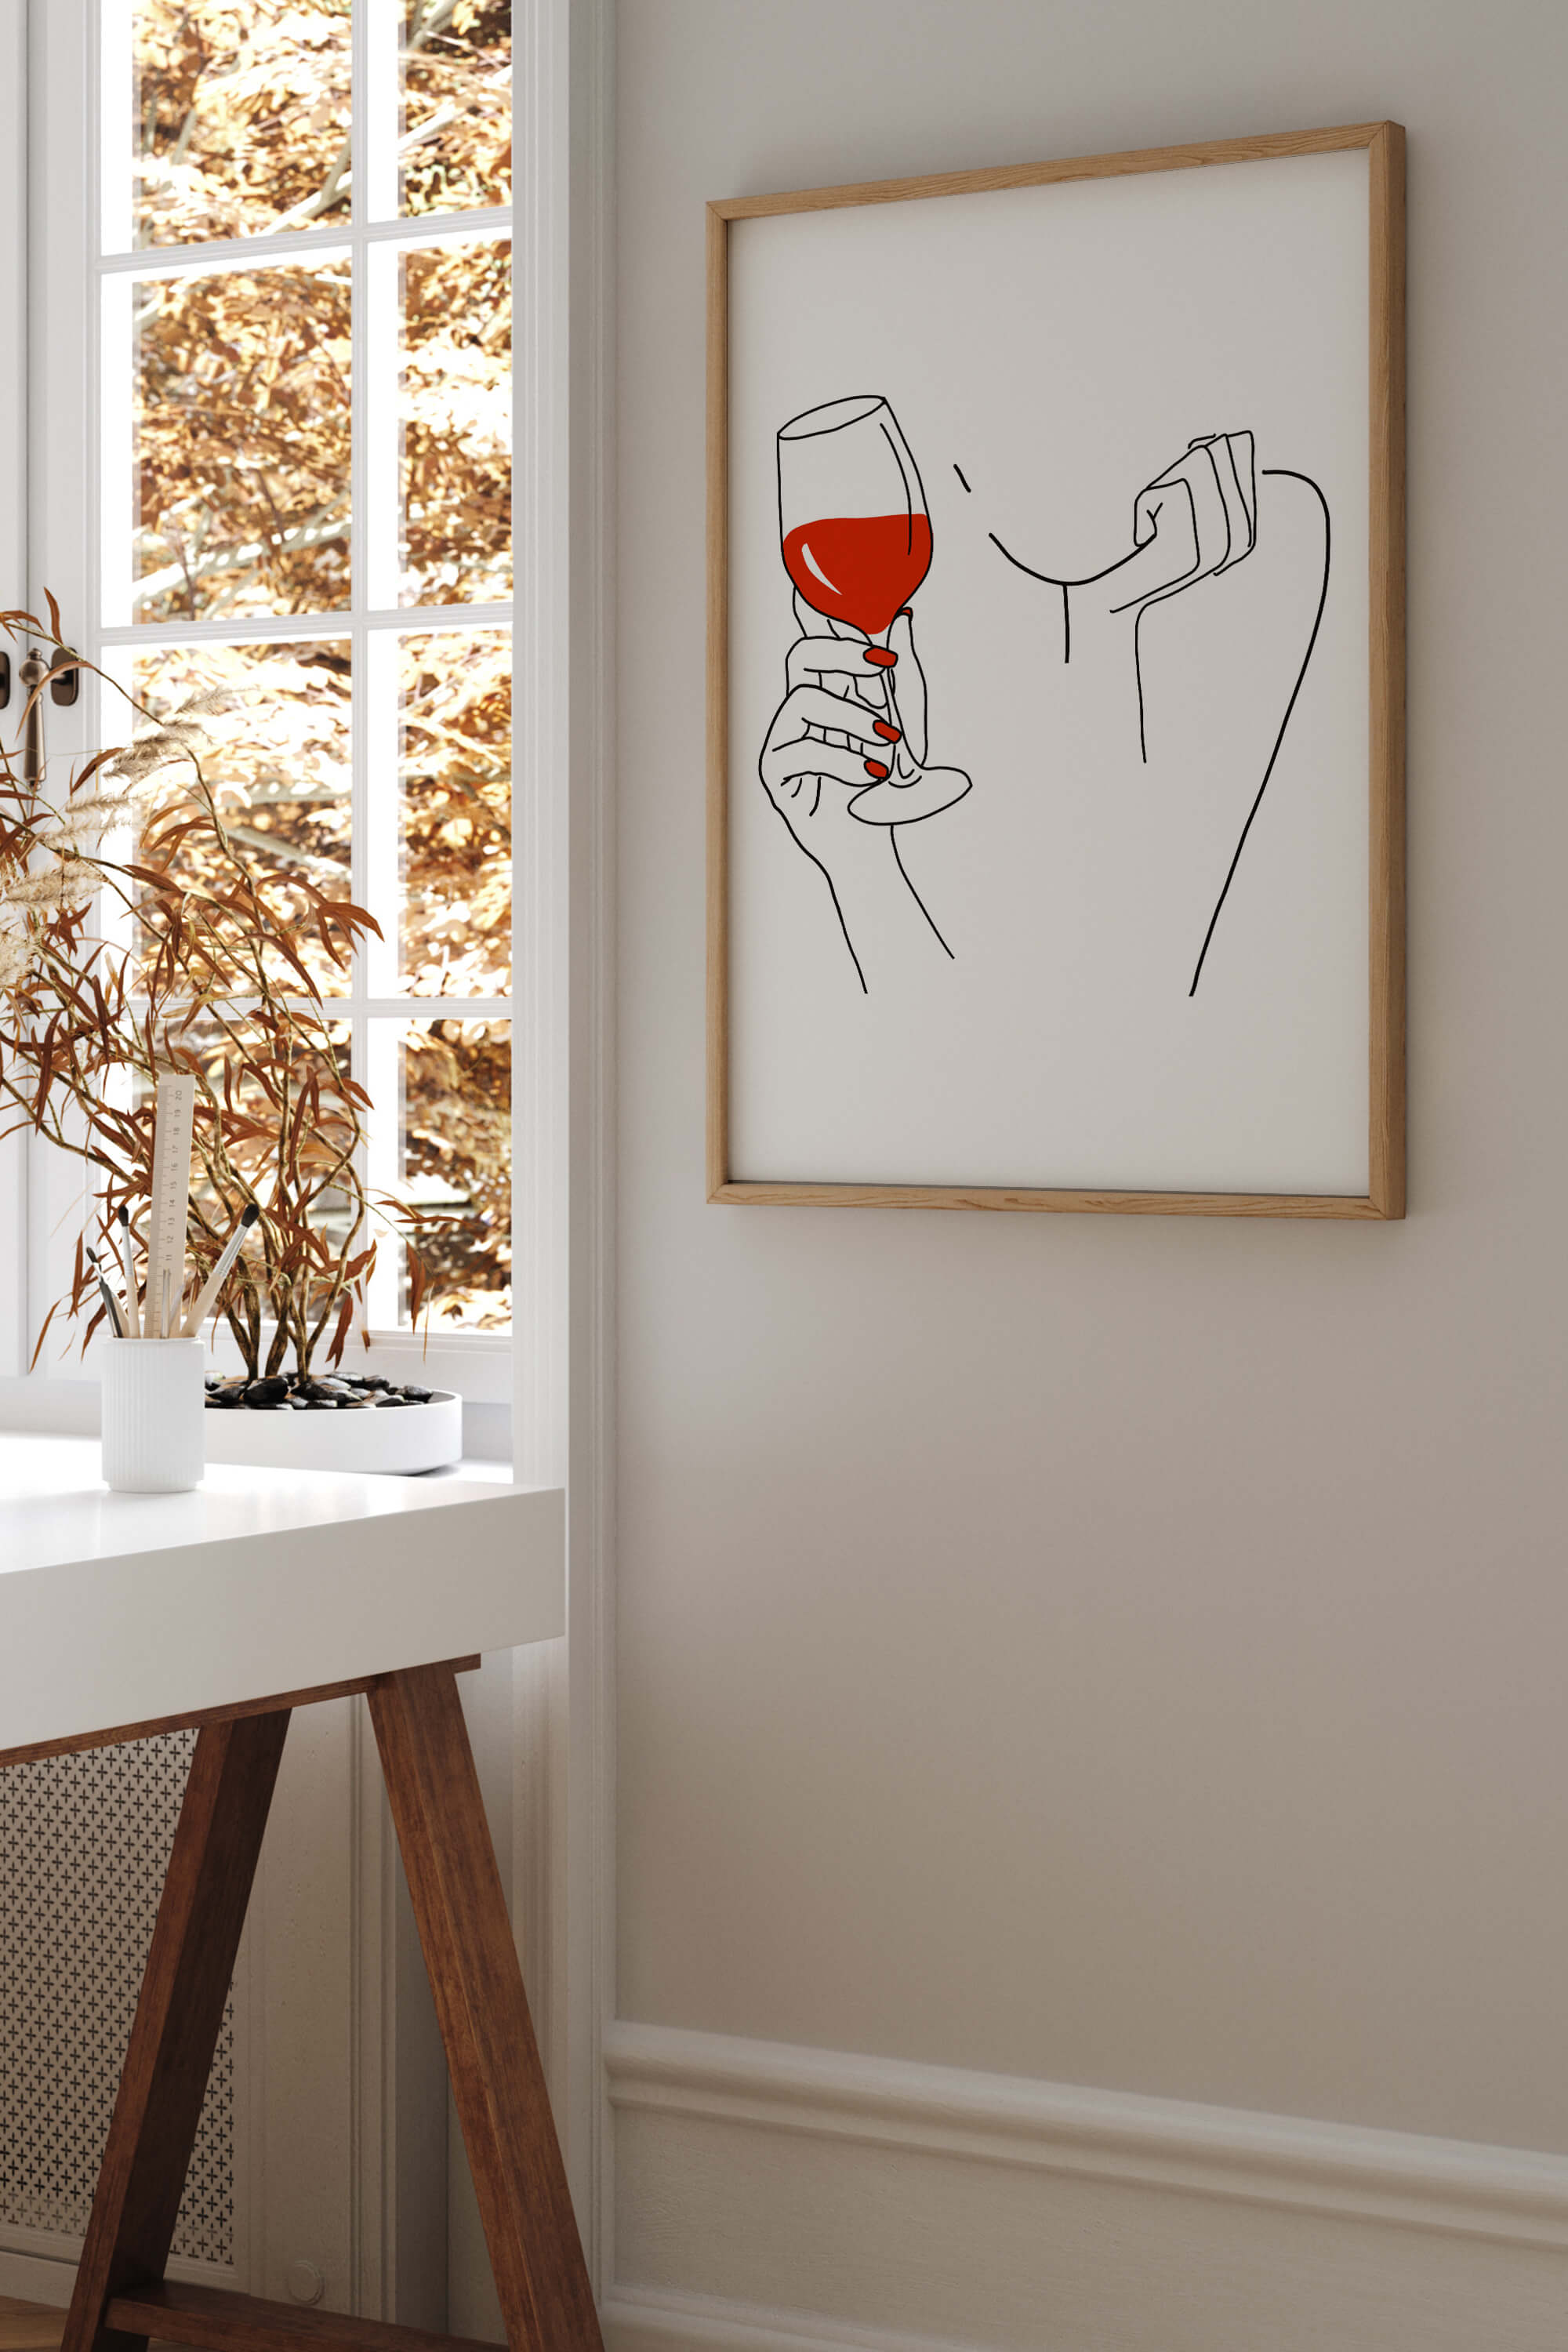 Artistic poster of a woman's silhouette with a wine glass, capturing the essence of bar cart wall art.